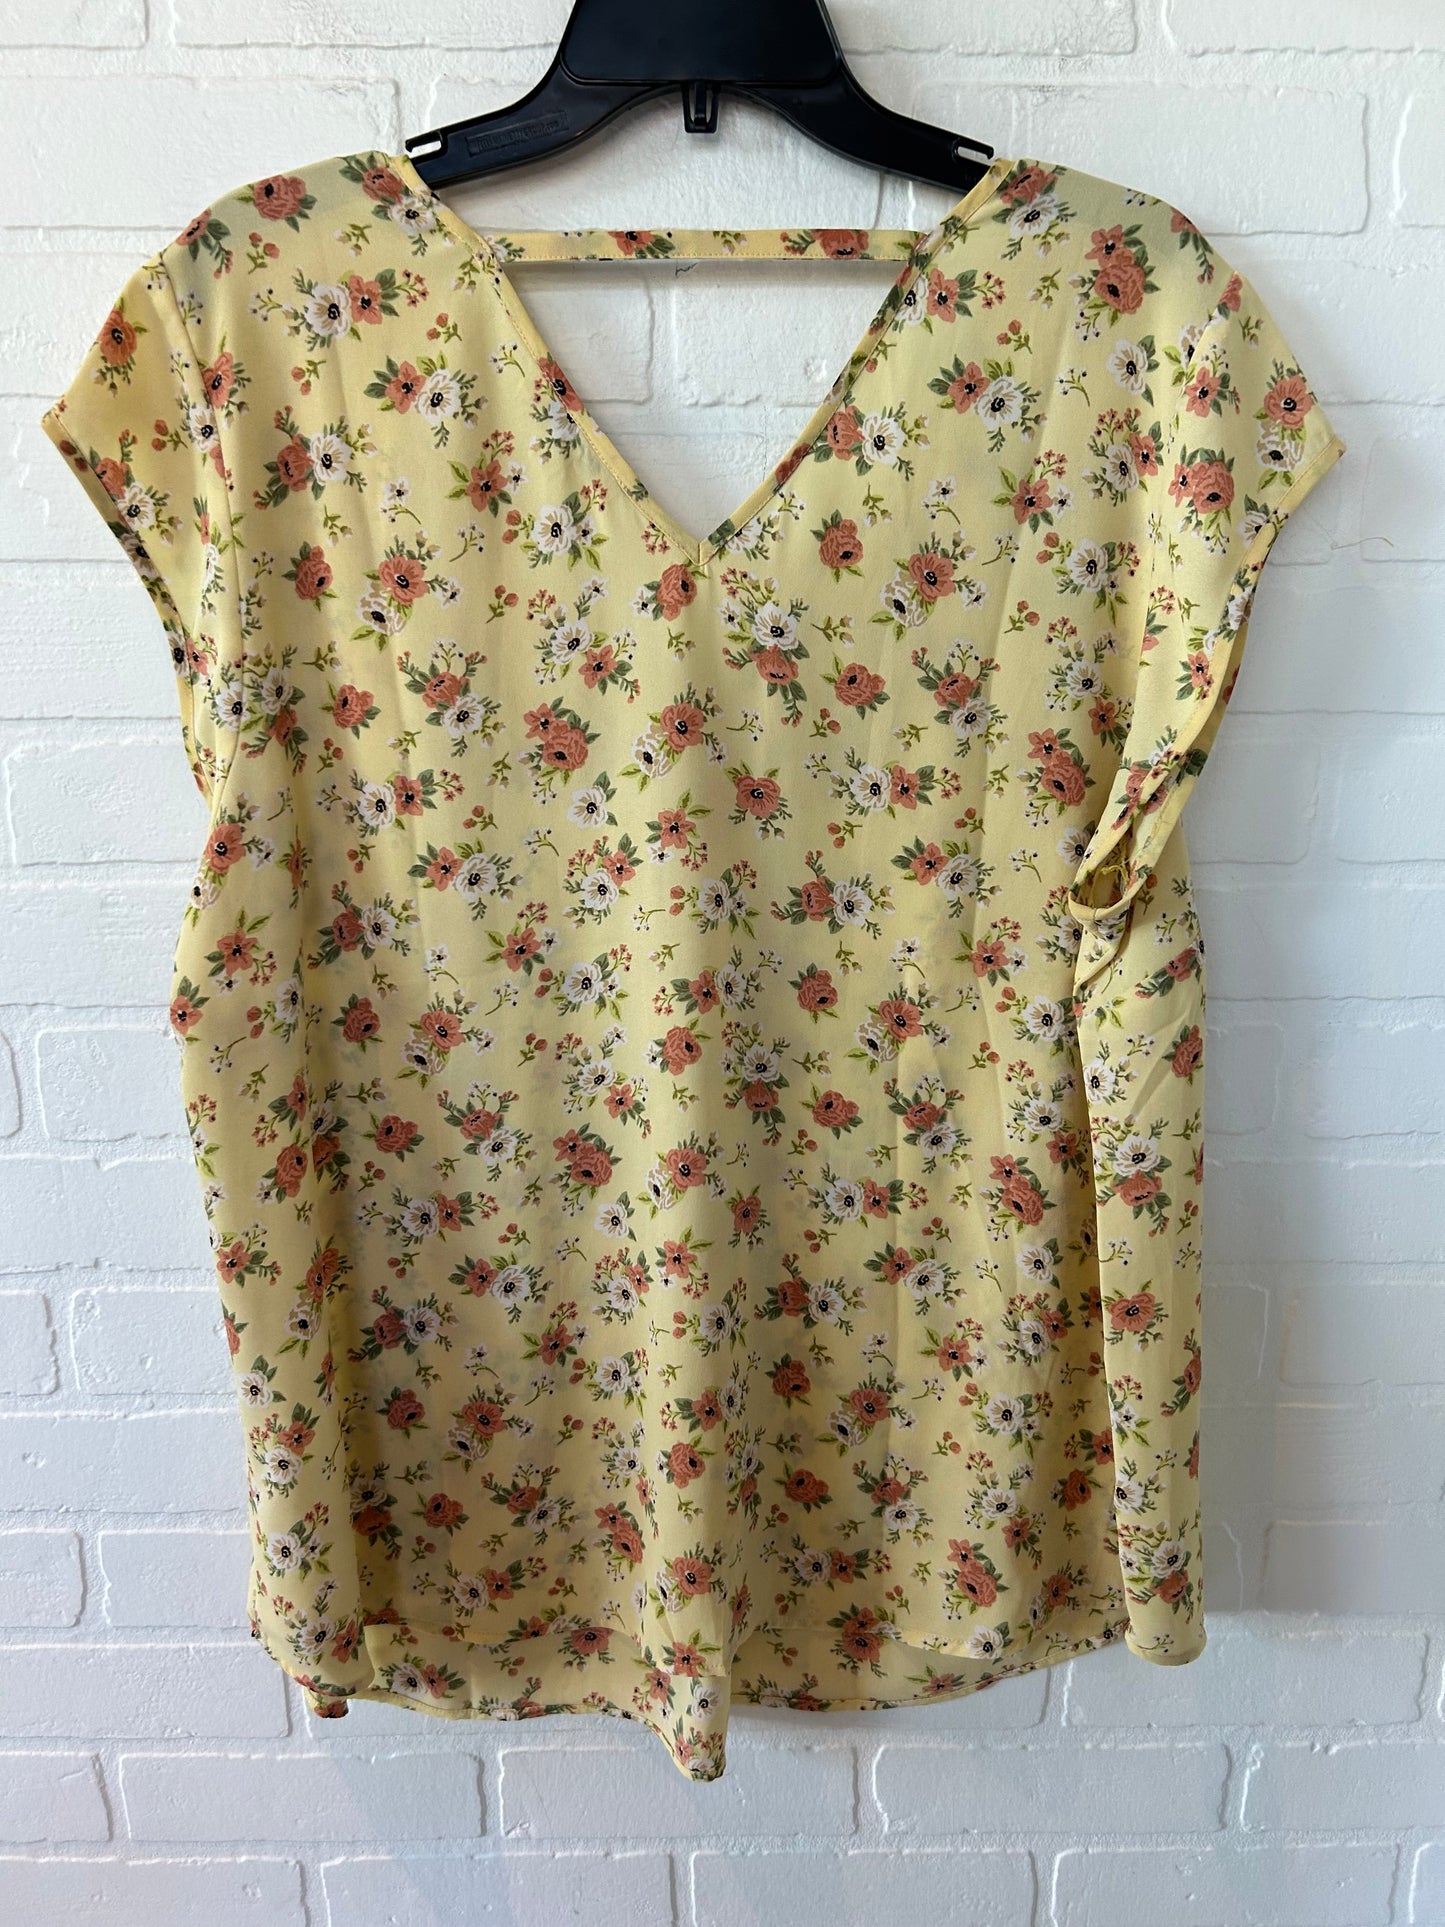 Blouse Short Sleeve By Clothes Mentor  Size: 2x